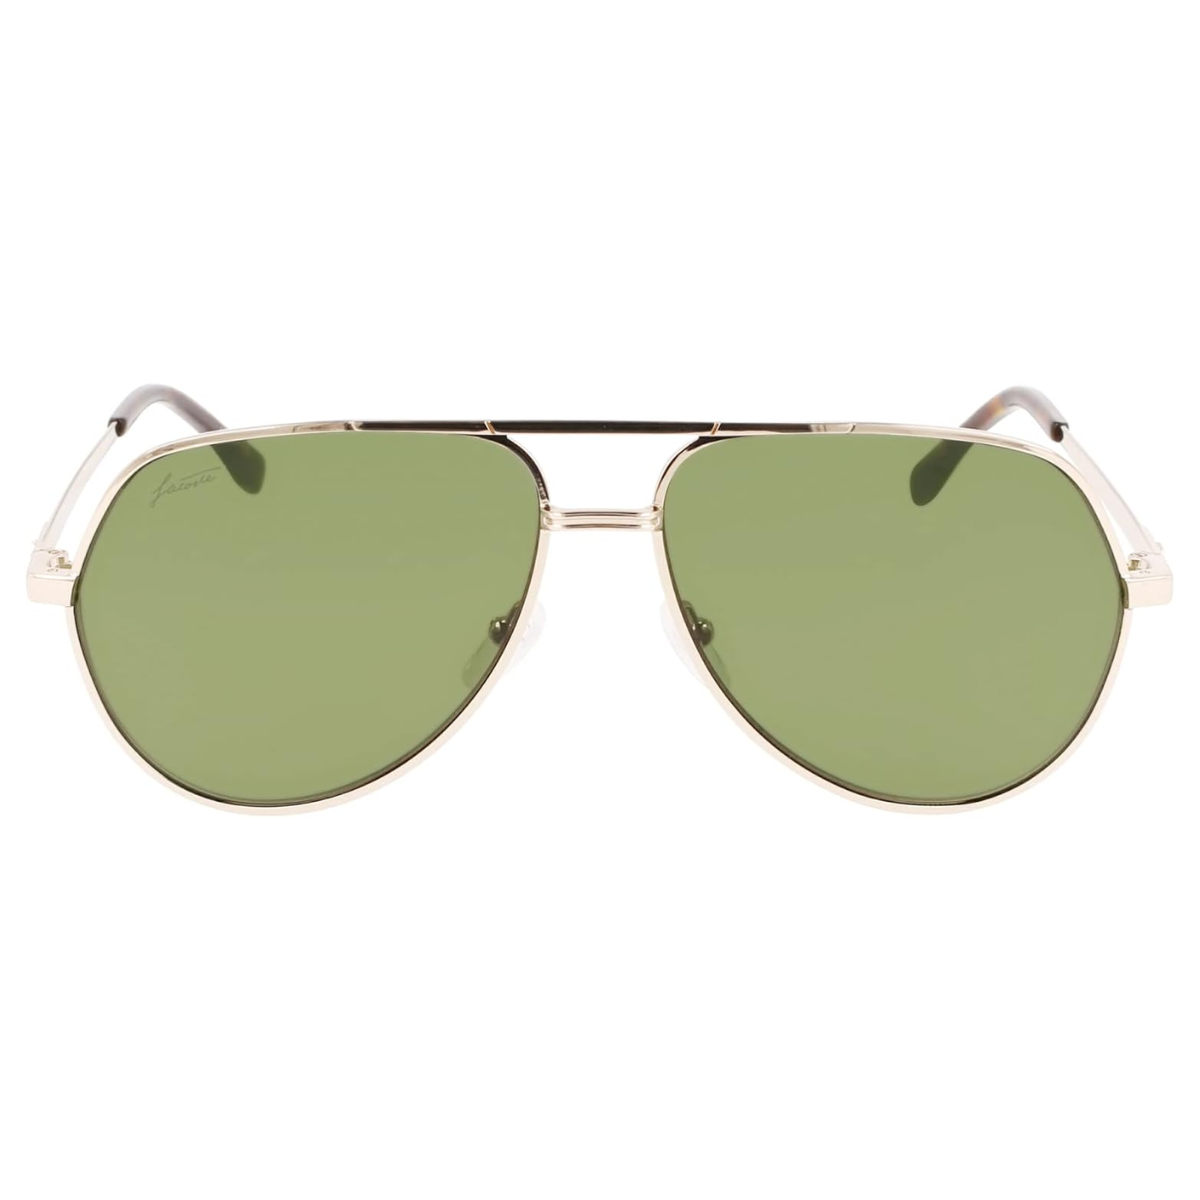 "Lacoste 250SE Sunglass: Aviator style, top brands, non-polarized lenses. Elevate your look with Optorium's ultimate sunglasses for men and women. Shop now!"